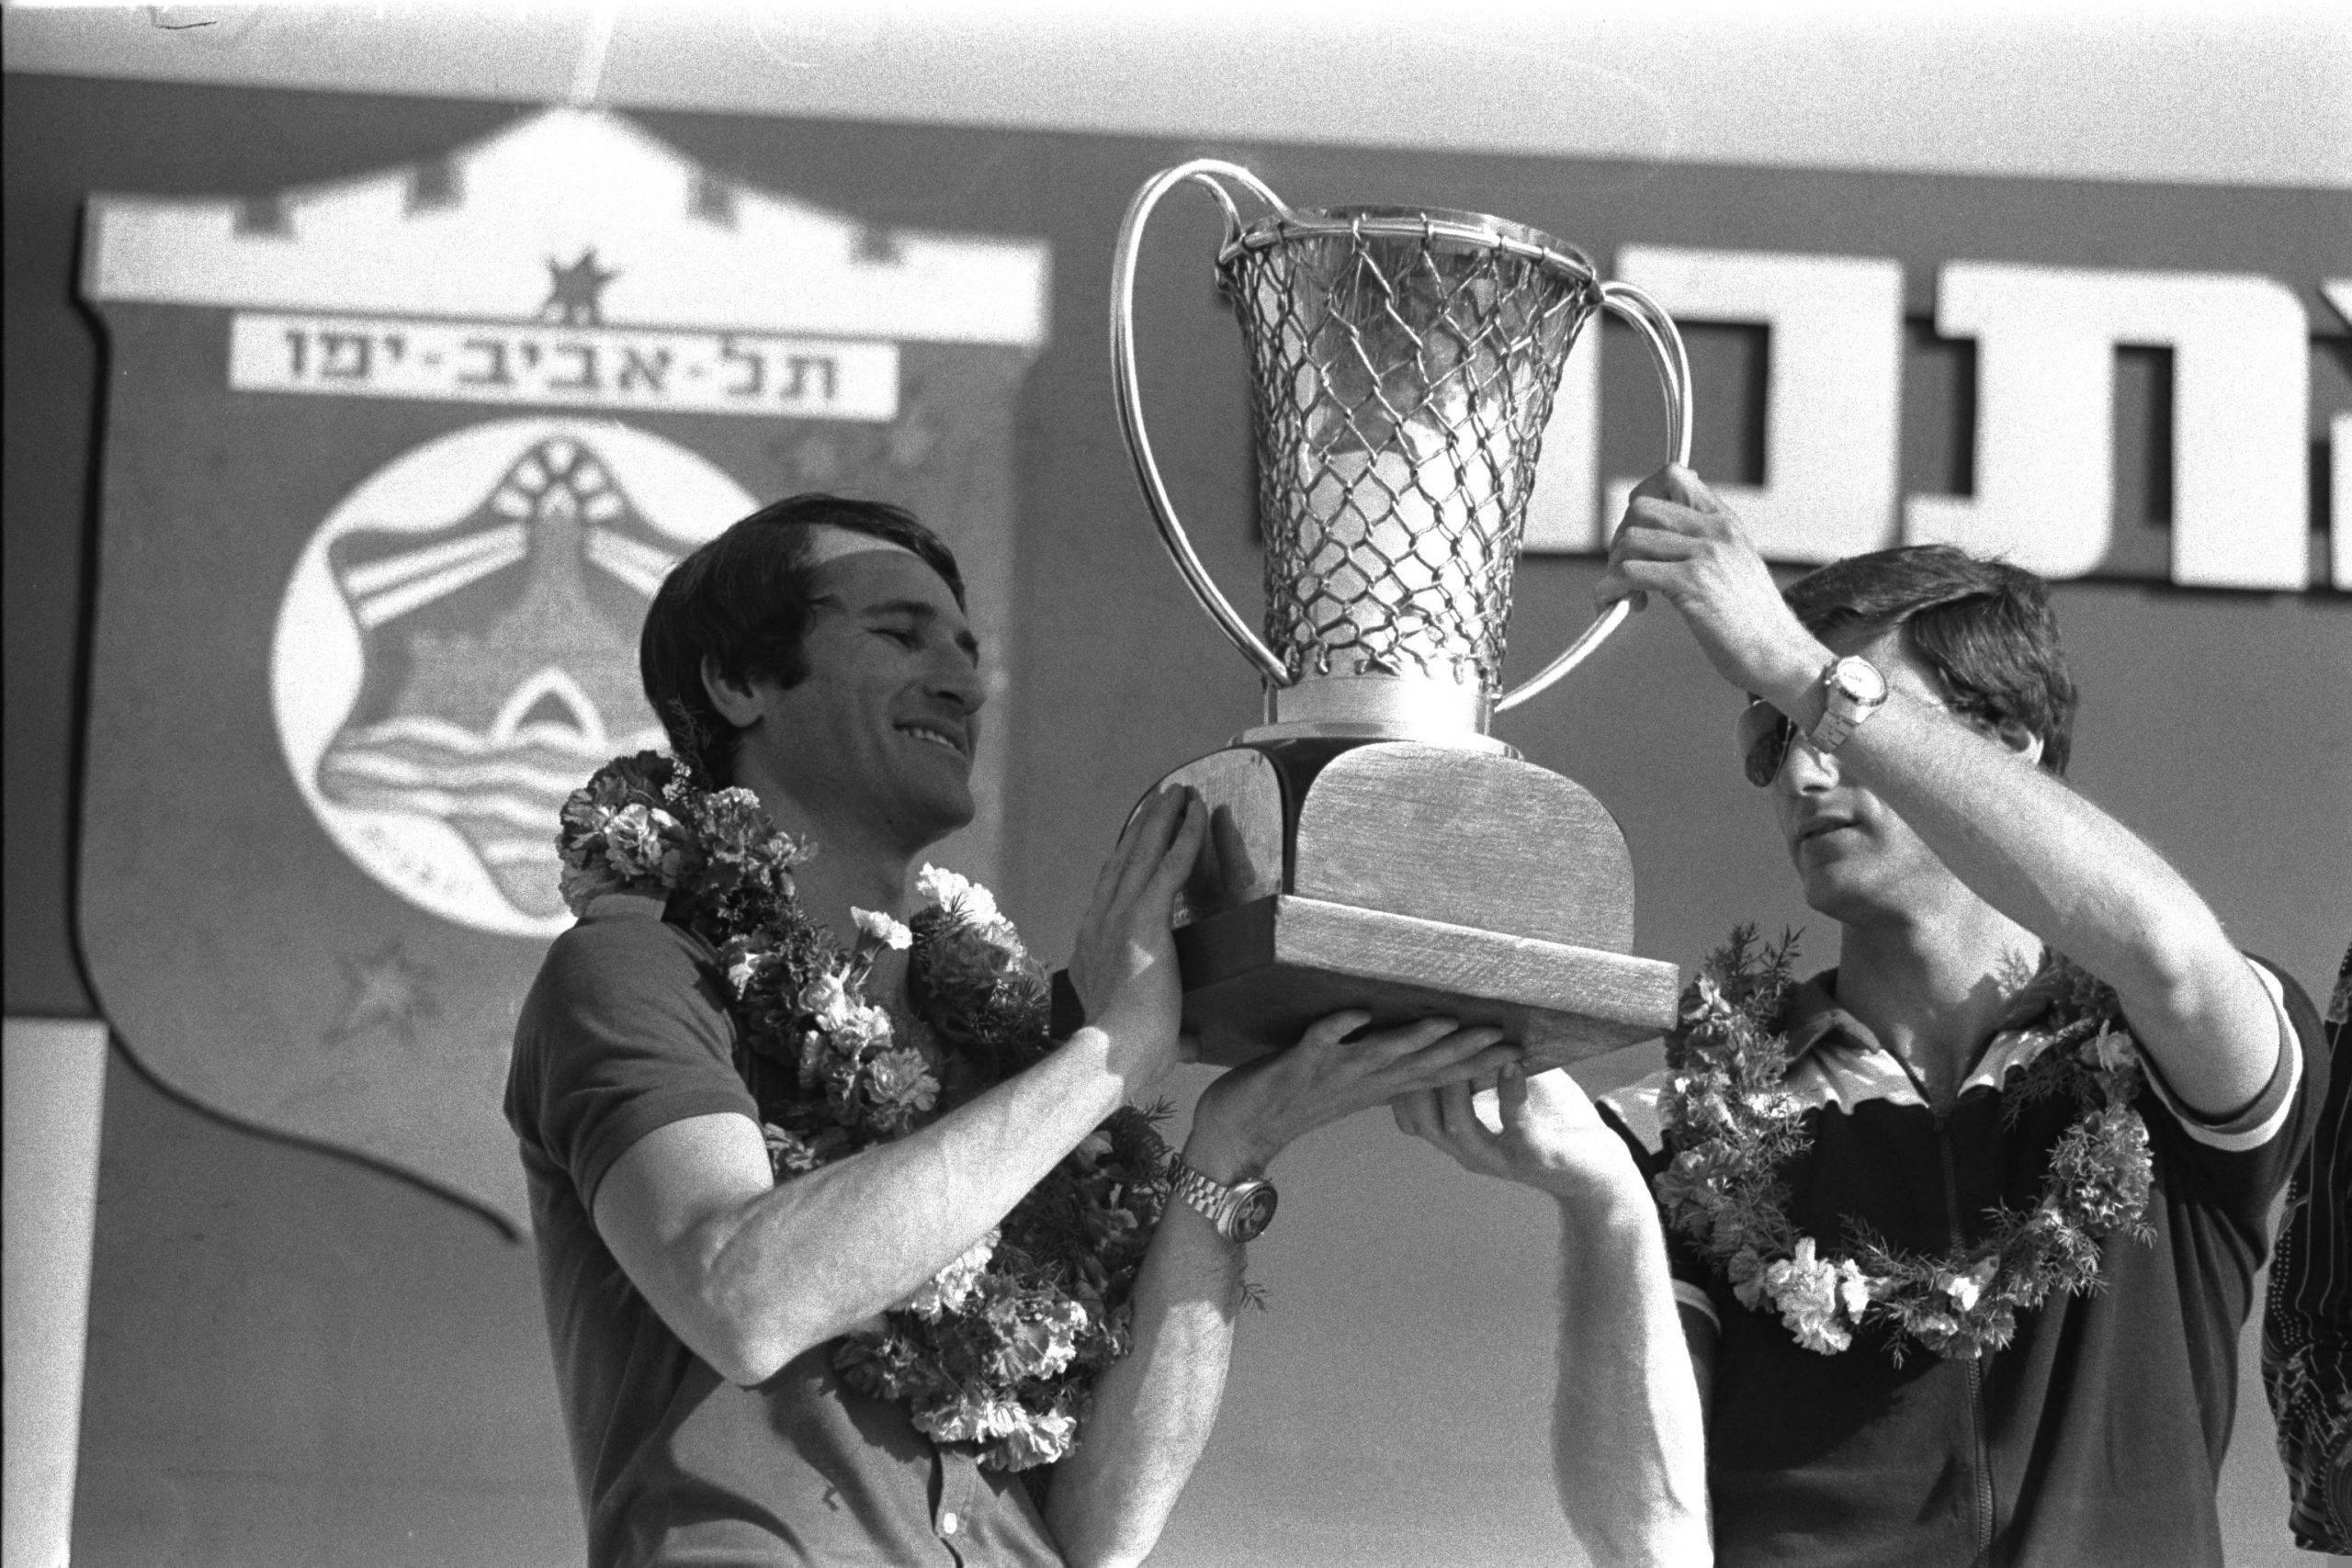 Tal Brody and Micky Berkovitz with the European Basketball cup